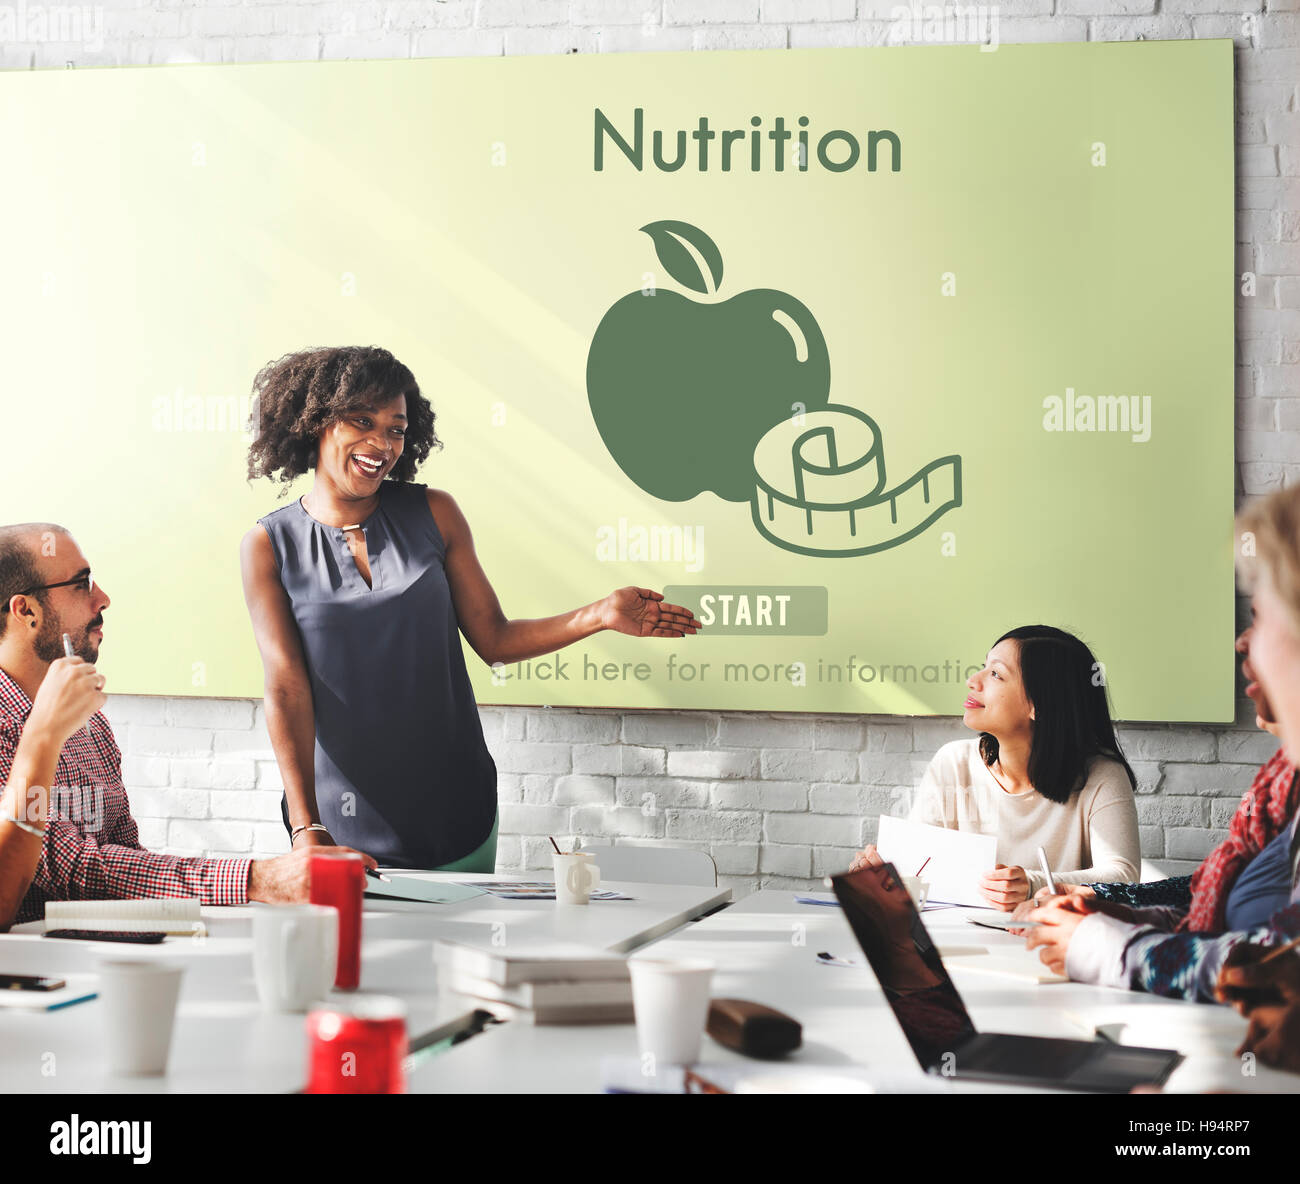 Nutrition Healthy Eating Diet Food Nourishment Concept Stock Photo